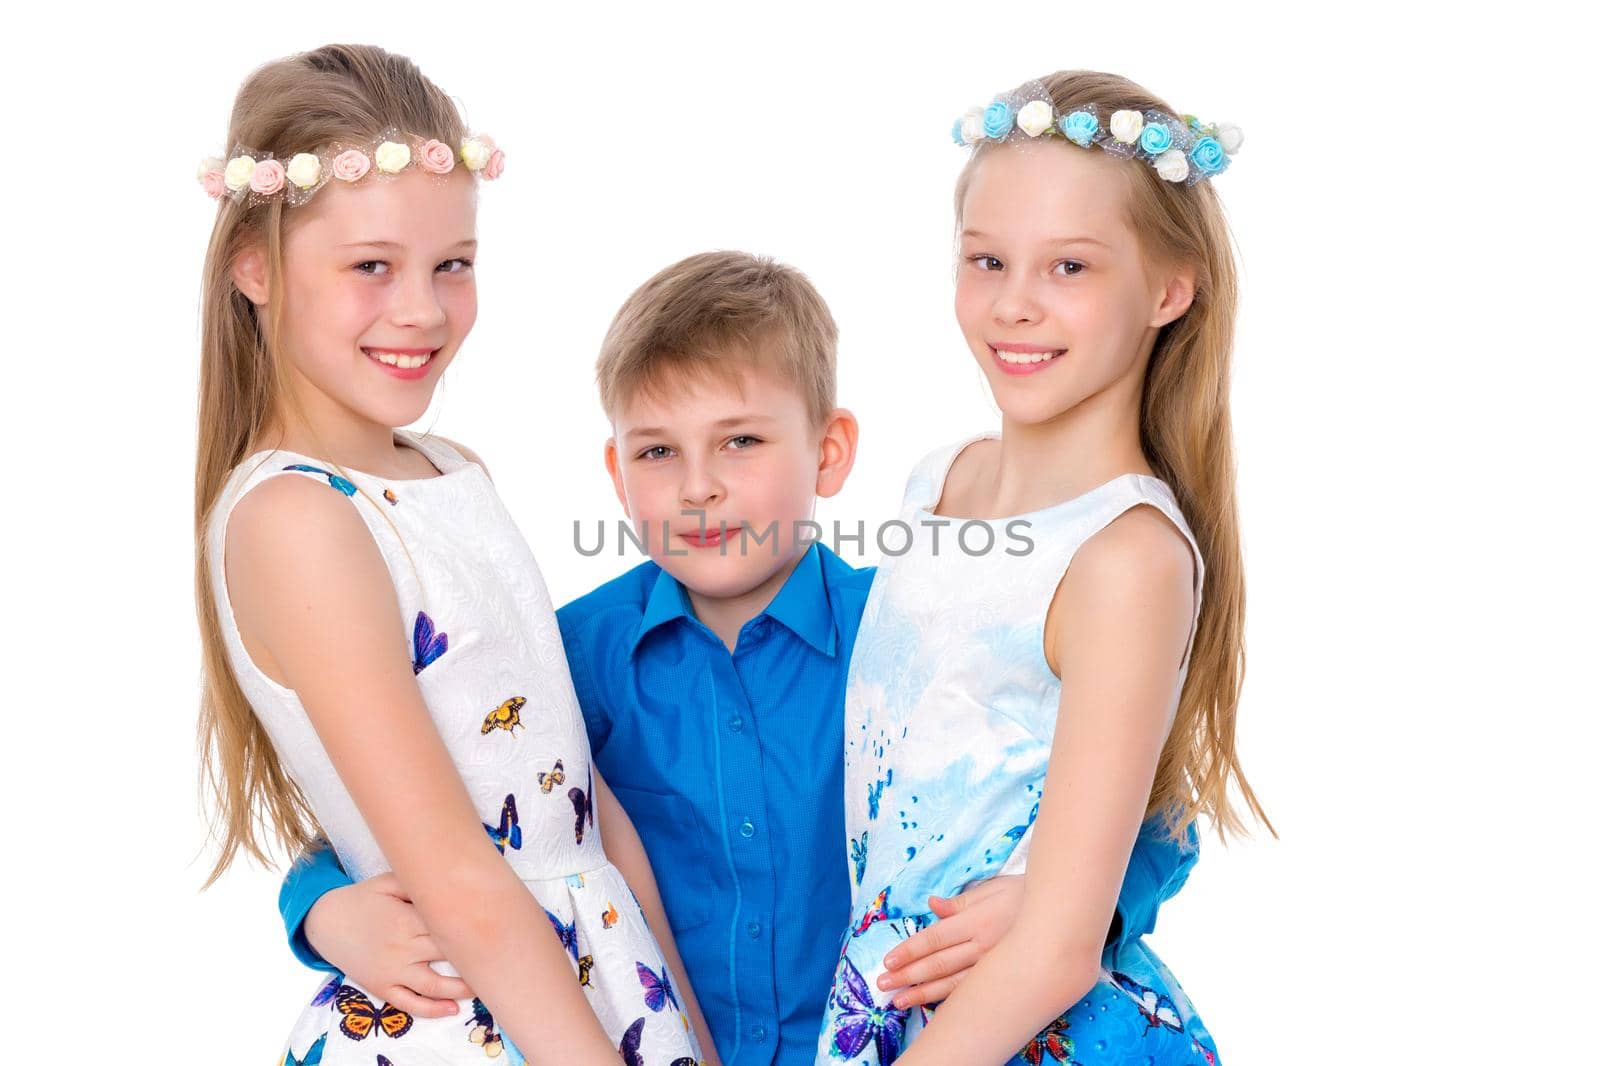 The cheerful girls are gymnasts, and the little boy of their brother hugs together. The concept of fitness and sports, a happy childhood. Isolated on white background.